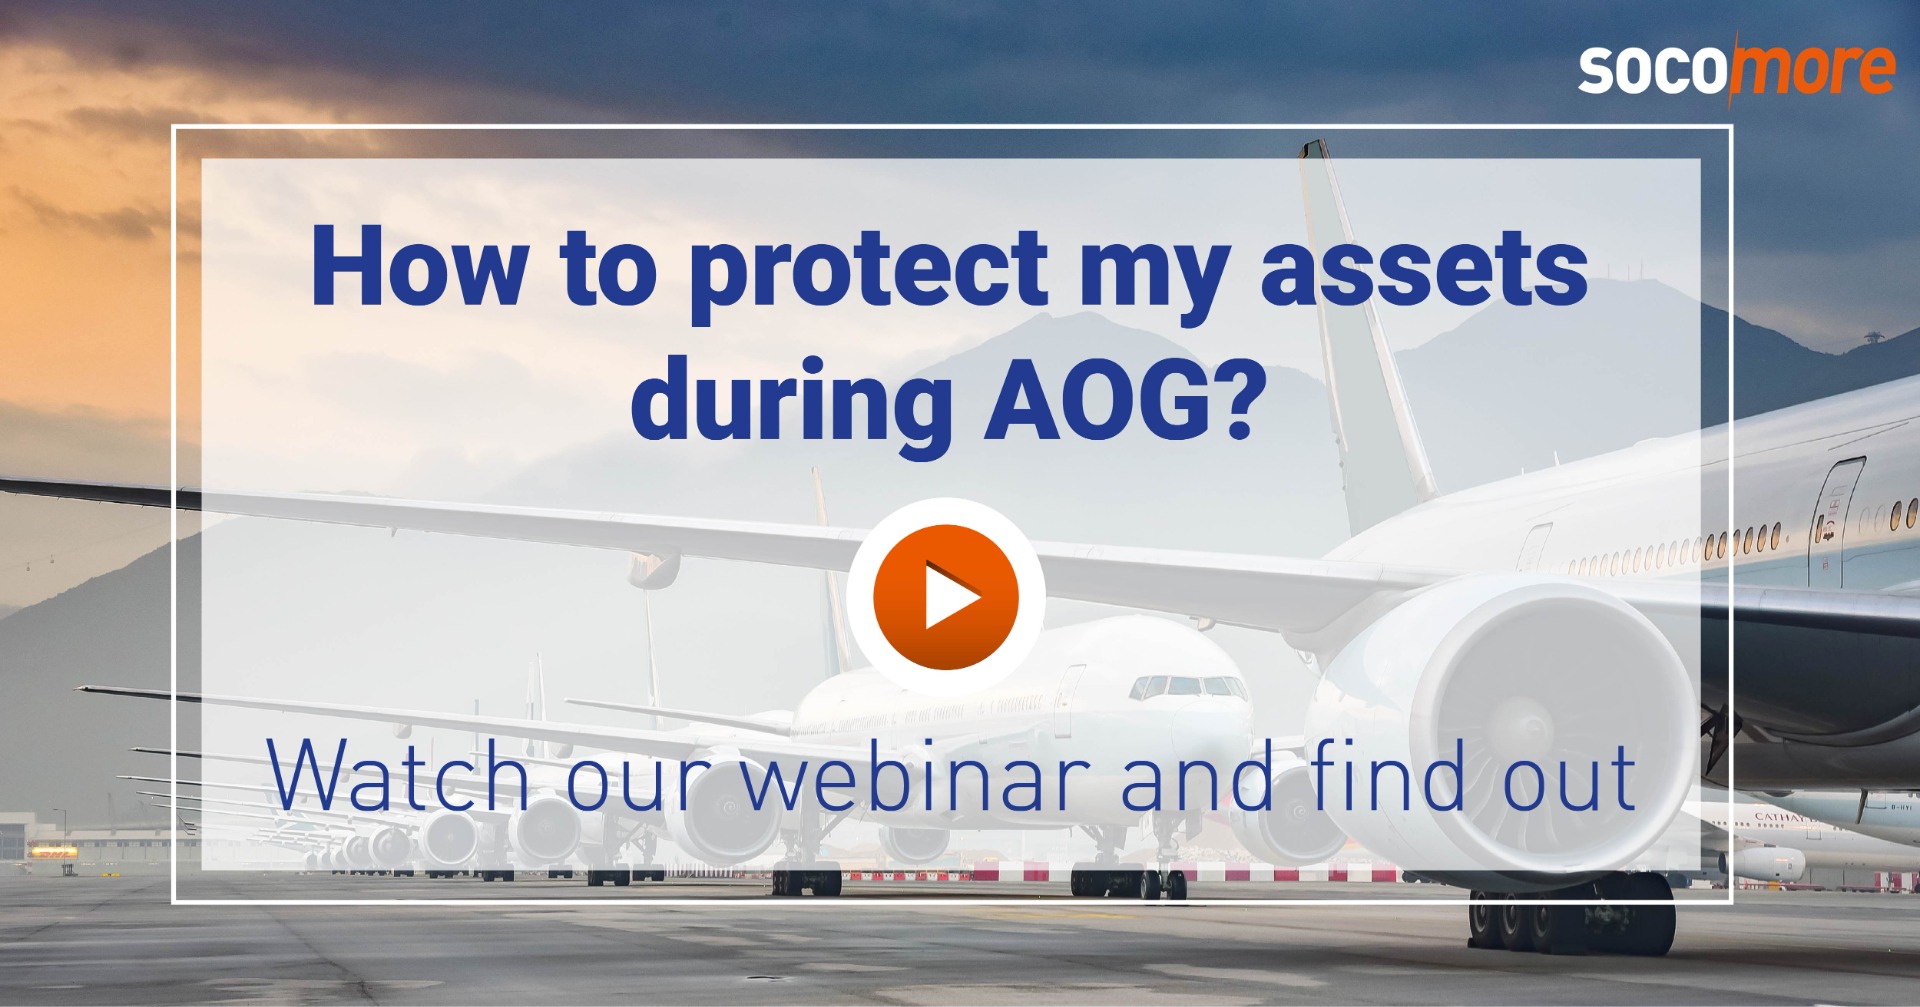 Protecting Your Assets During AOG And Long Term Preservation